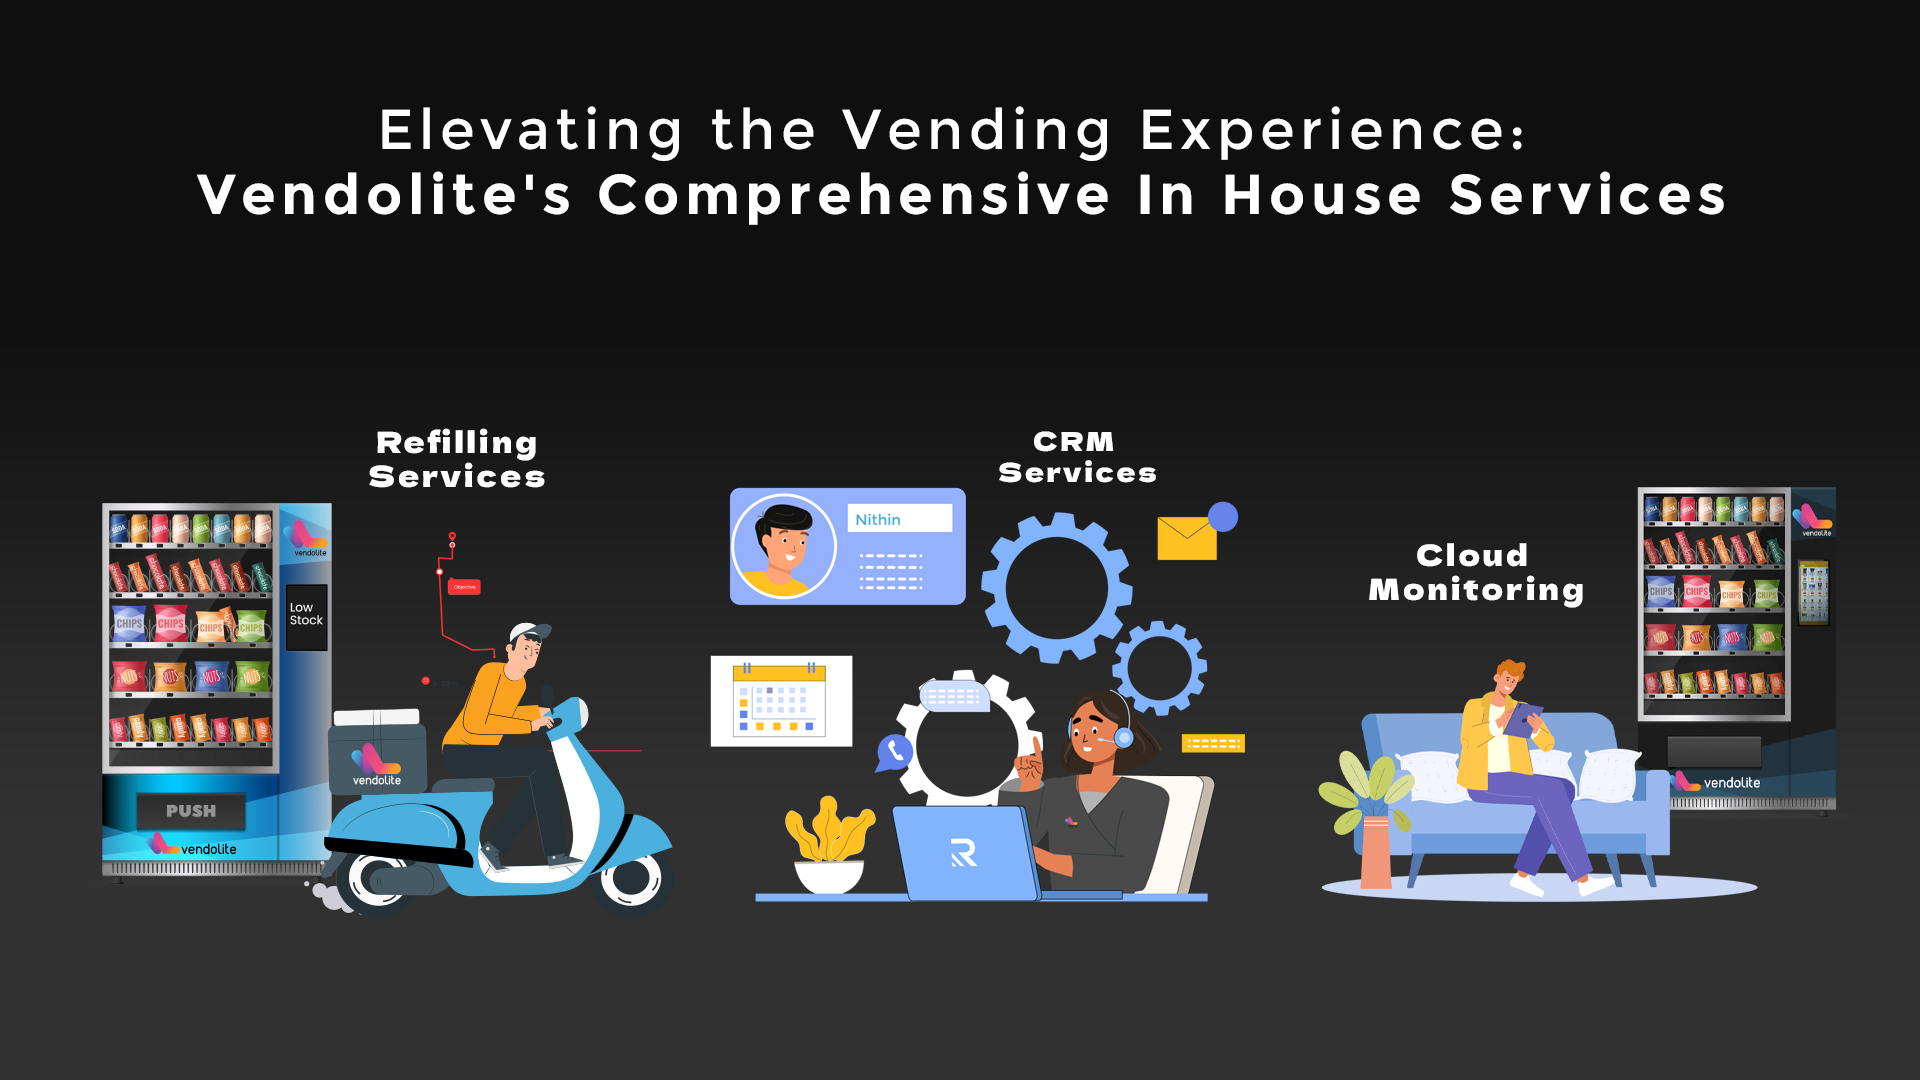 Elevating the Vending Experience: Vendolite's Comprehensive In House Services